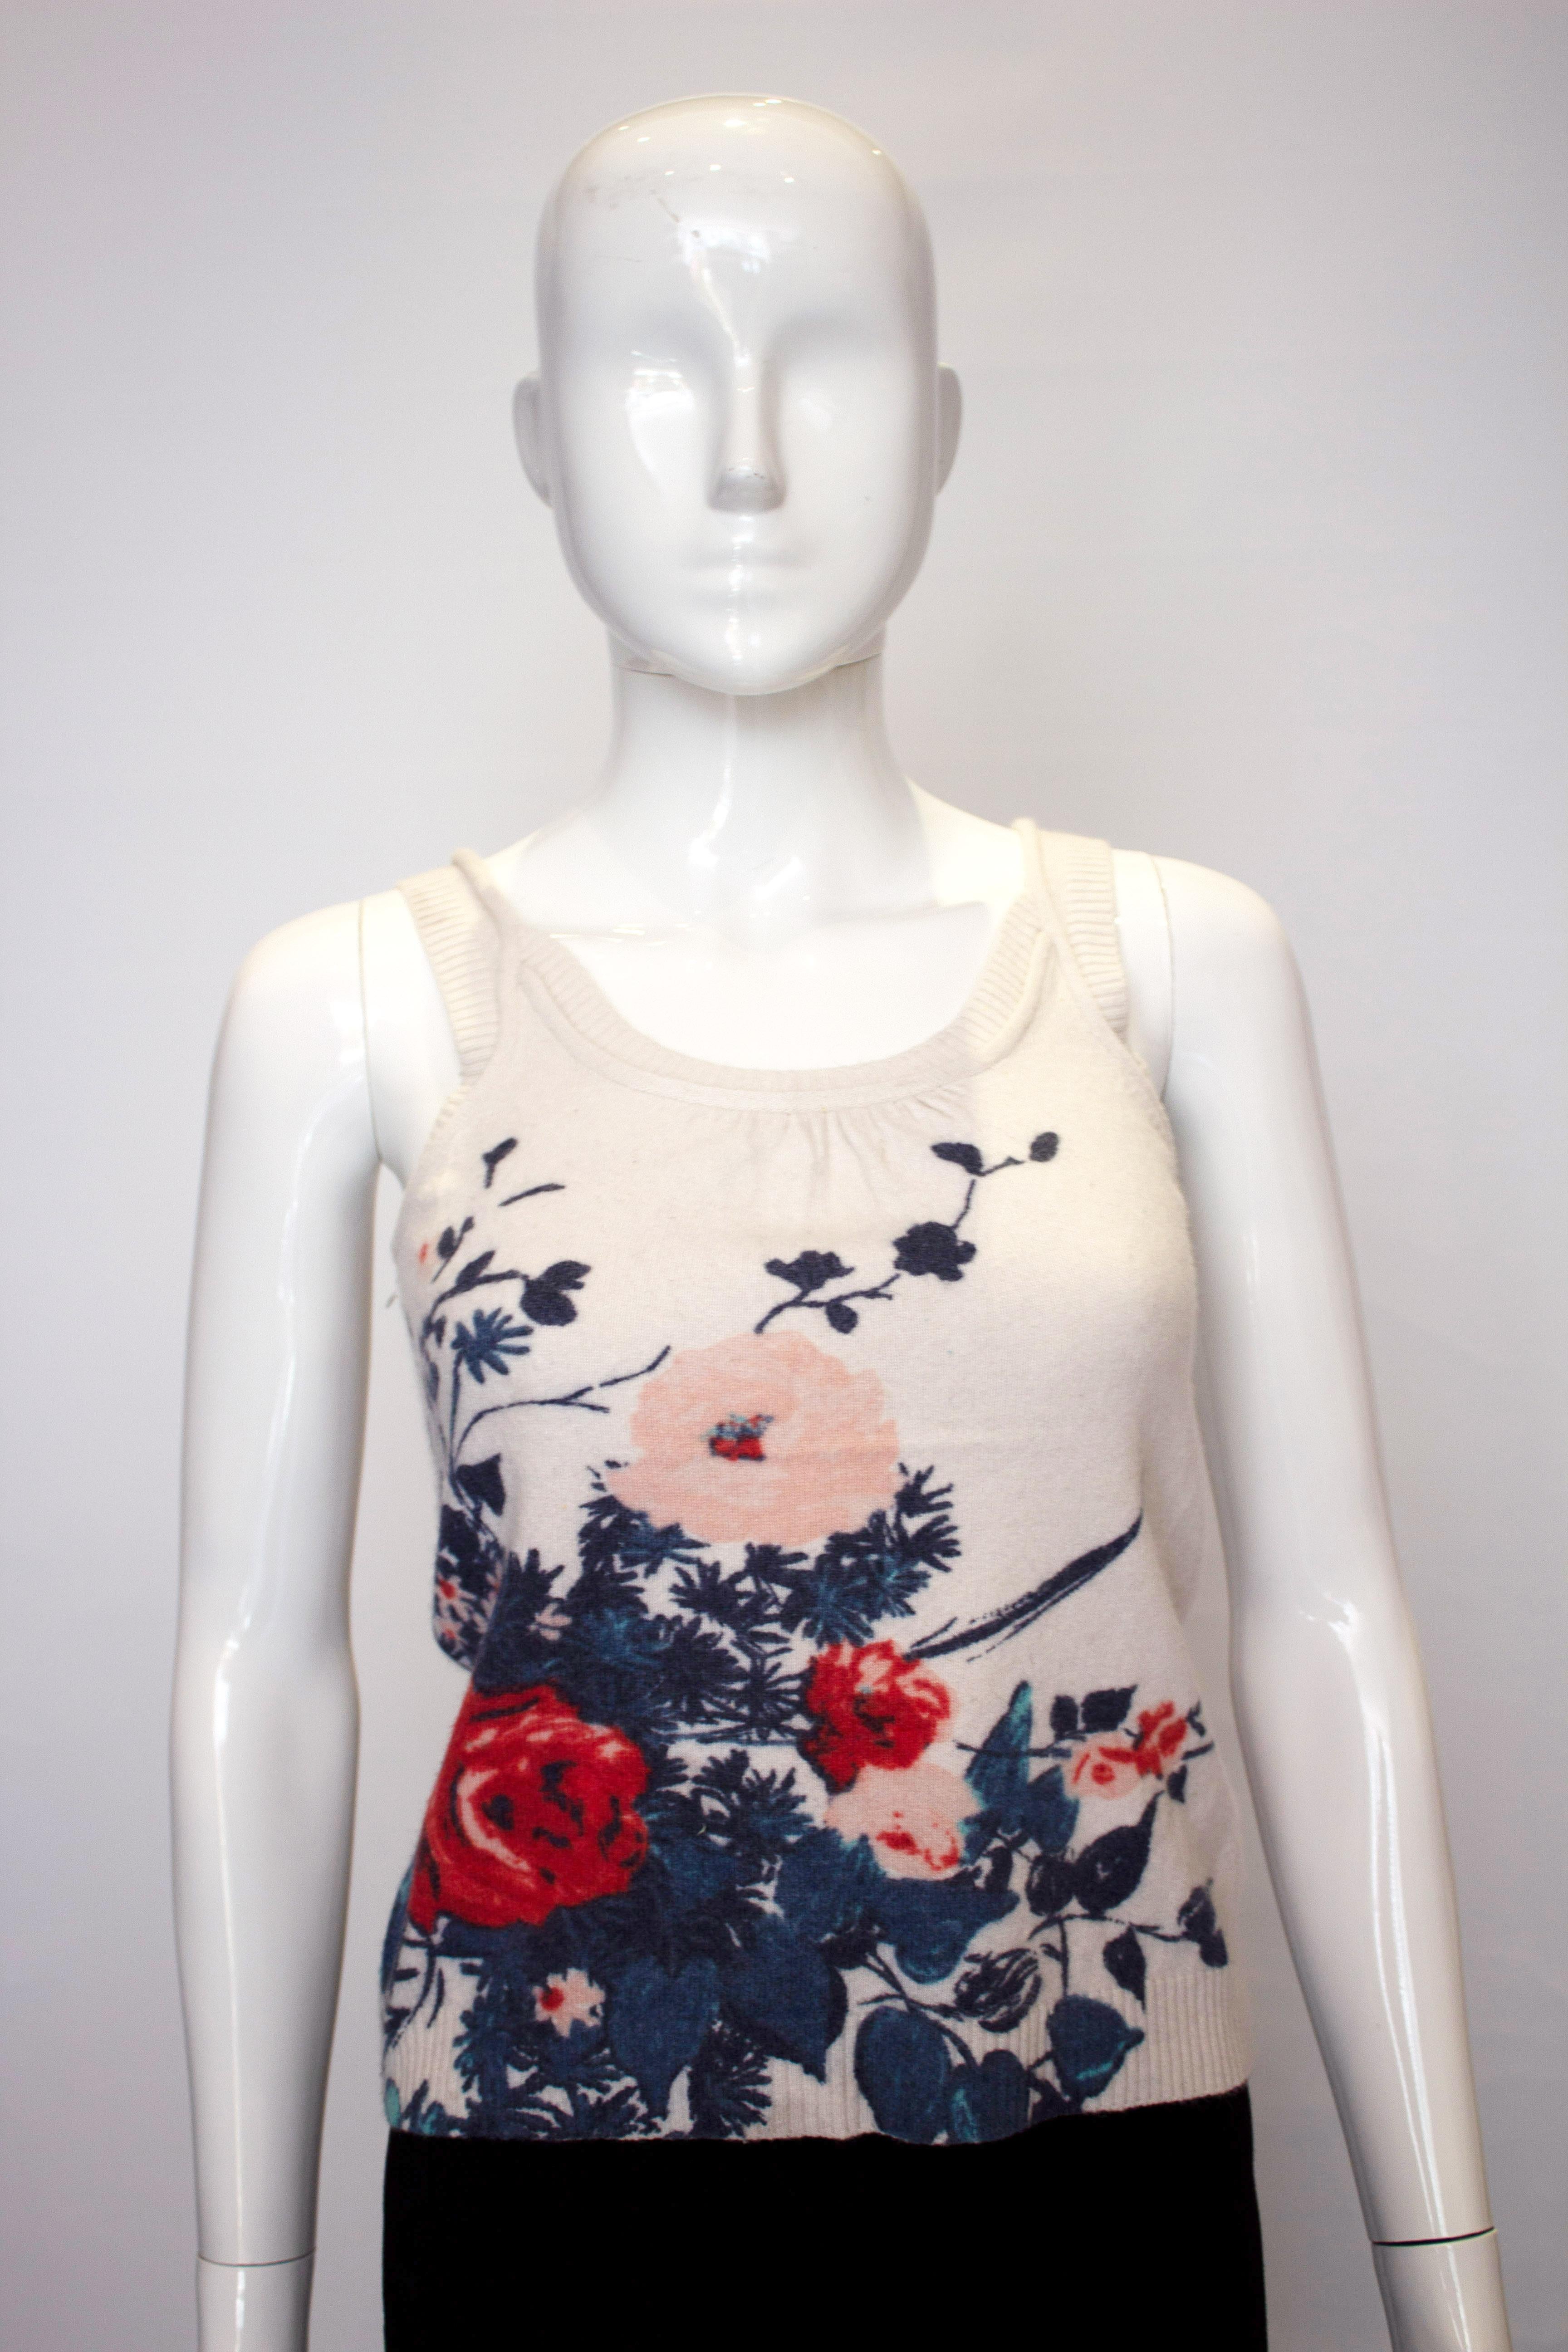 A fun tank top for Spring/Summer by Kenzo.  The top has a round neckline with ribbing on the shoulders and a floral design on the front and back.